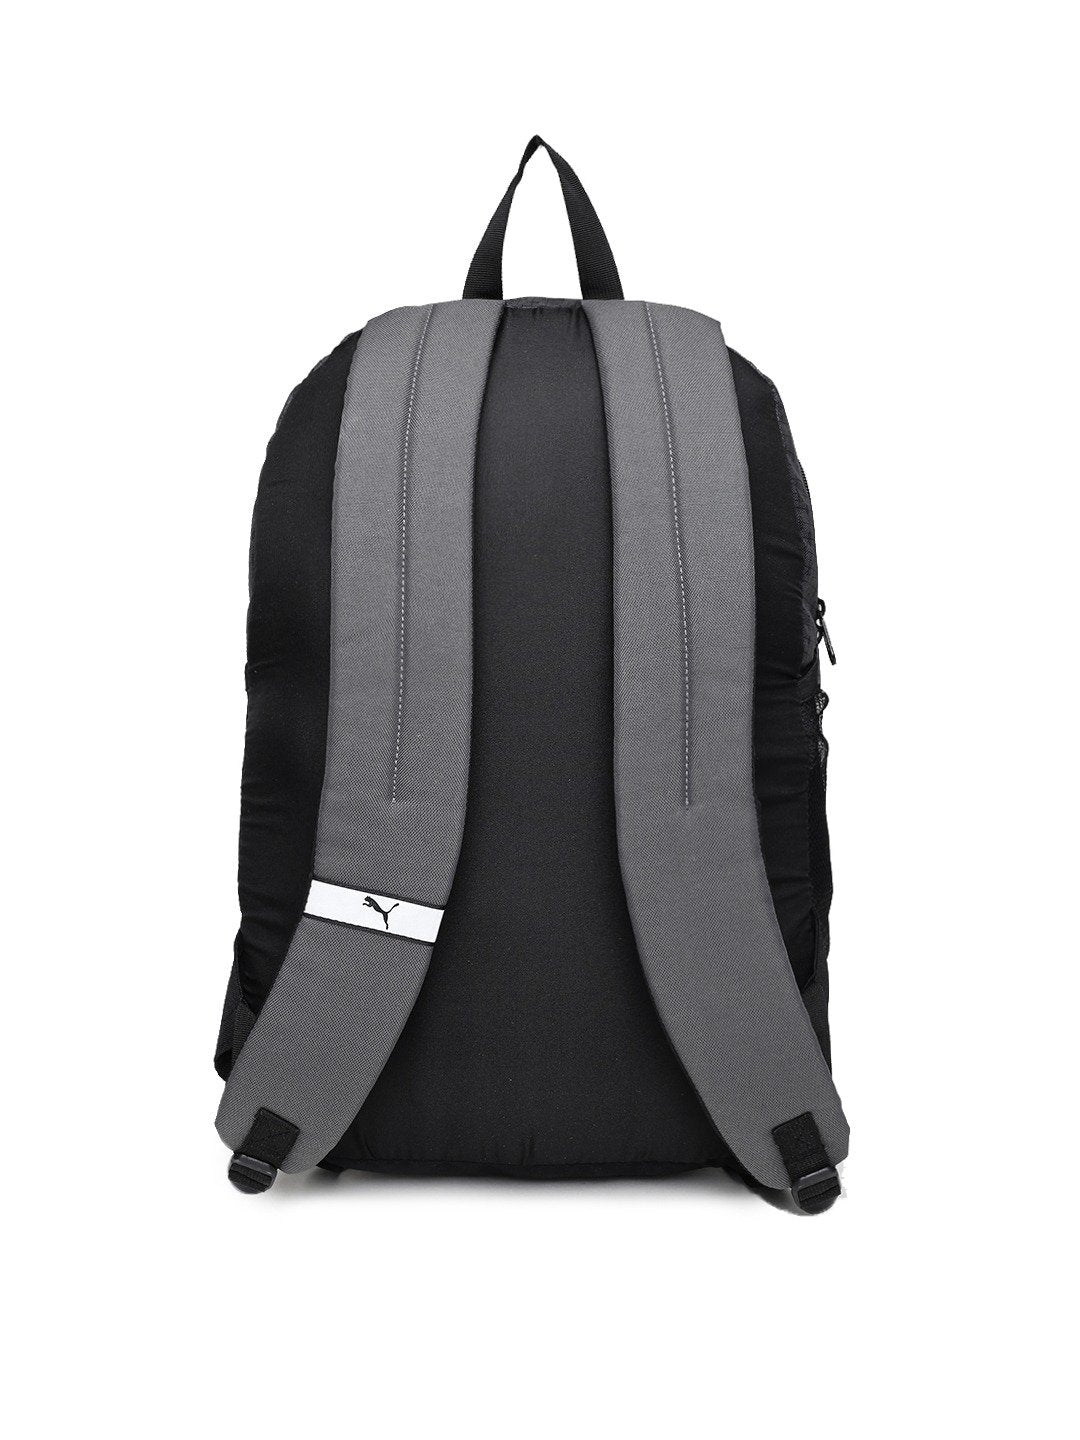 Unisex Black & Grey Colourblocked Backpack-07549501 - Discount Store